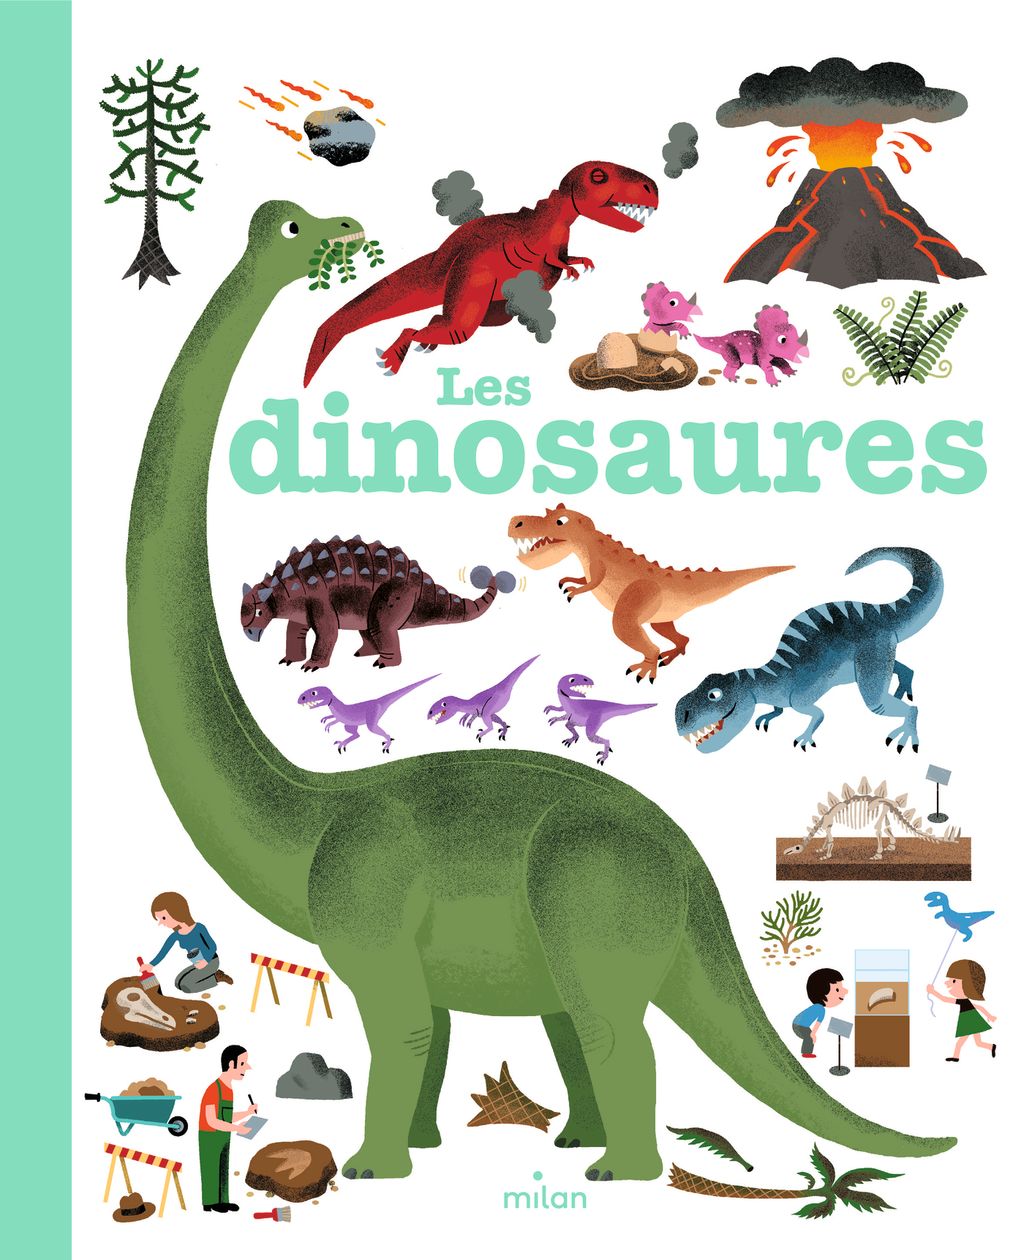 « Les dinosaures » cover